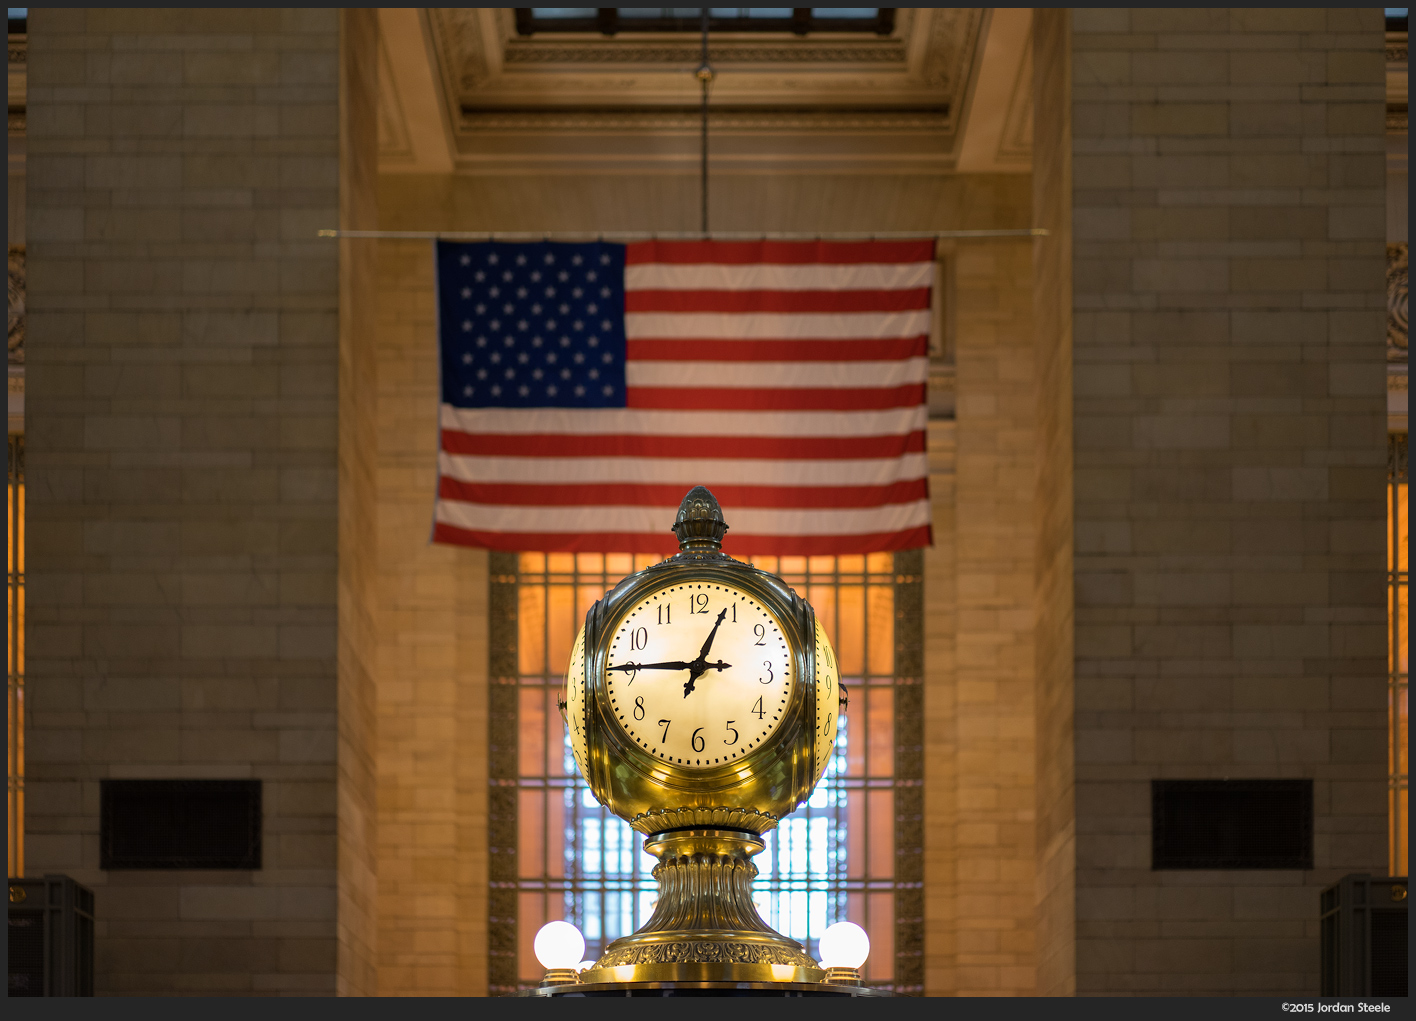 Grand Central Clock - Sony A7 II with Zeiss FE 55mm f/1.8 @ f/1.8, 